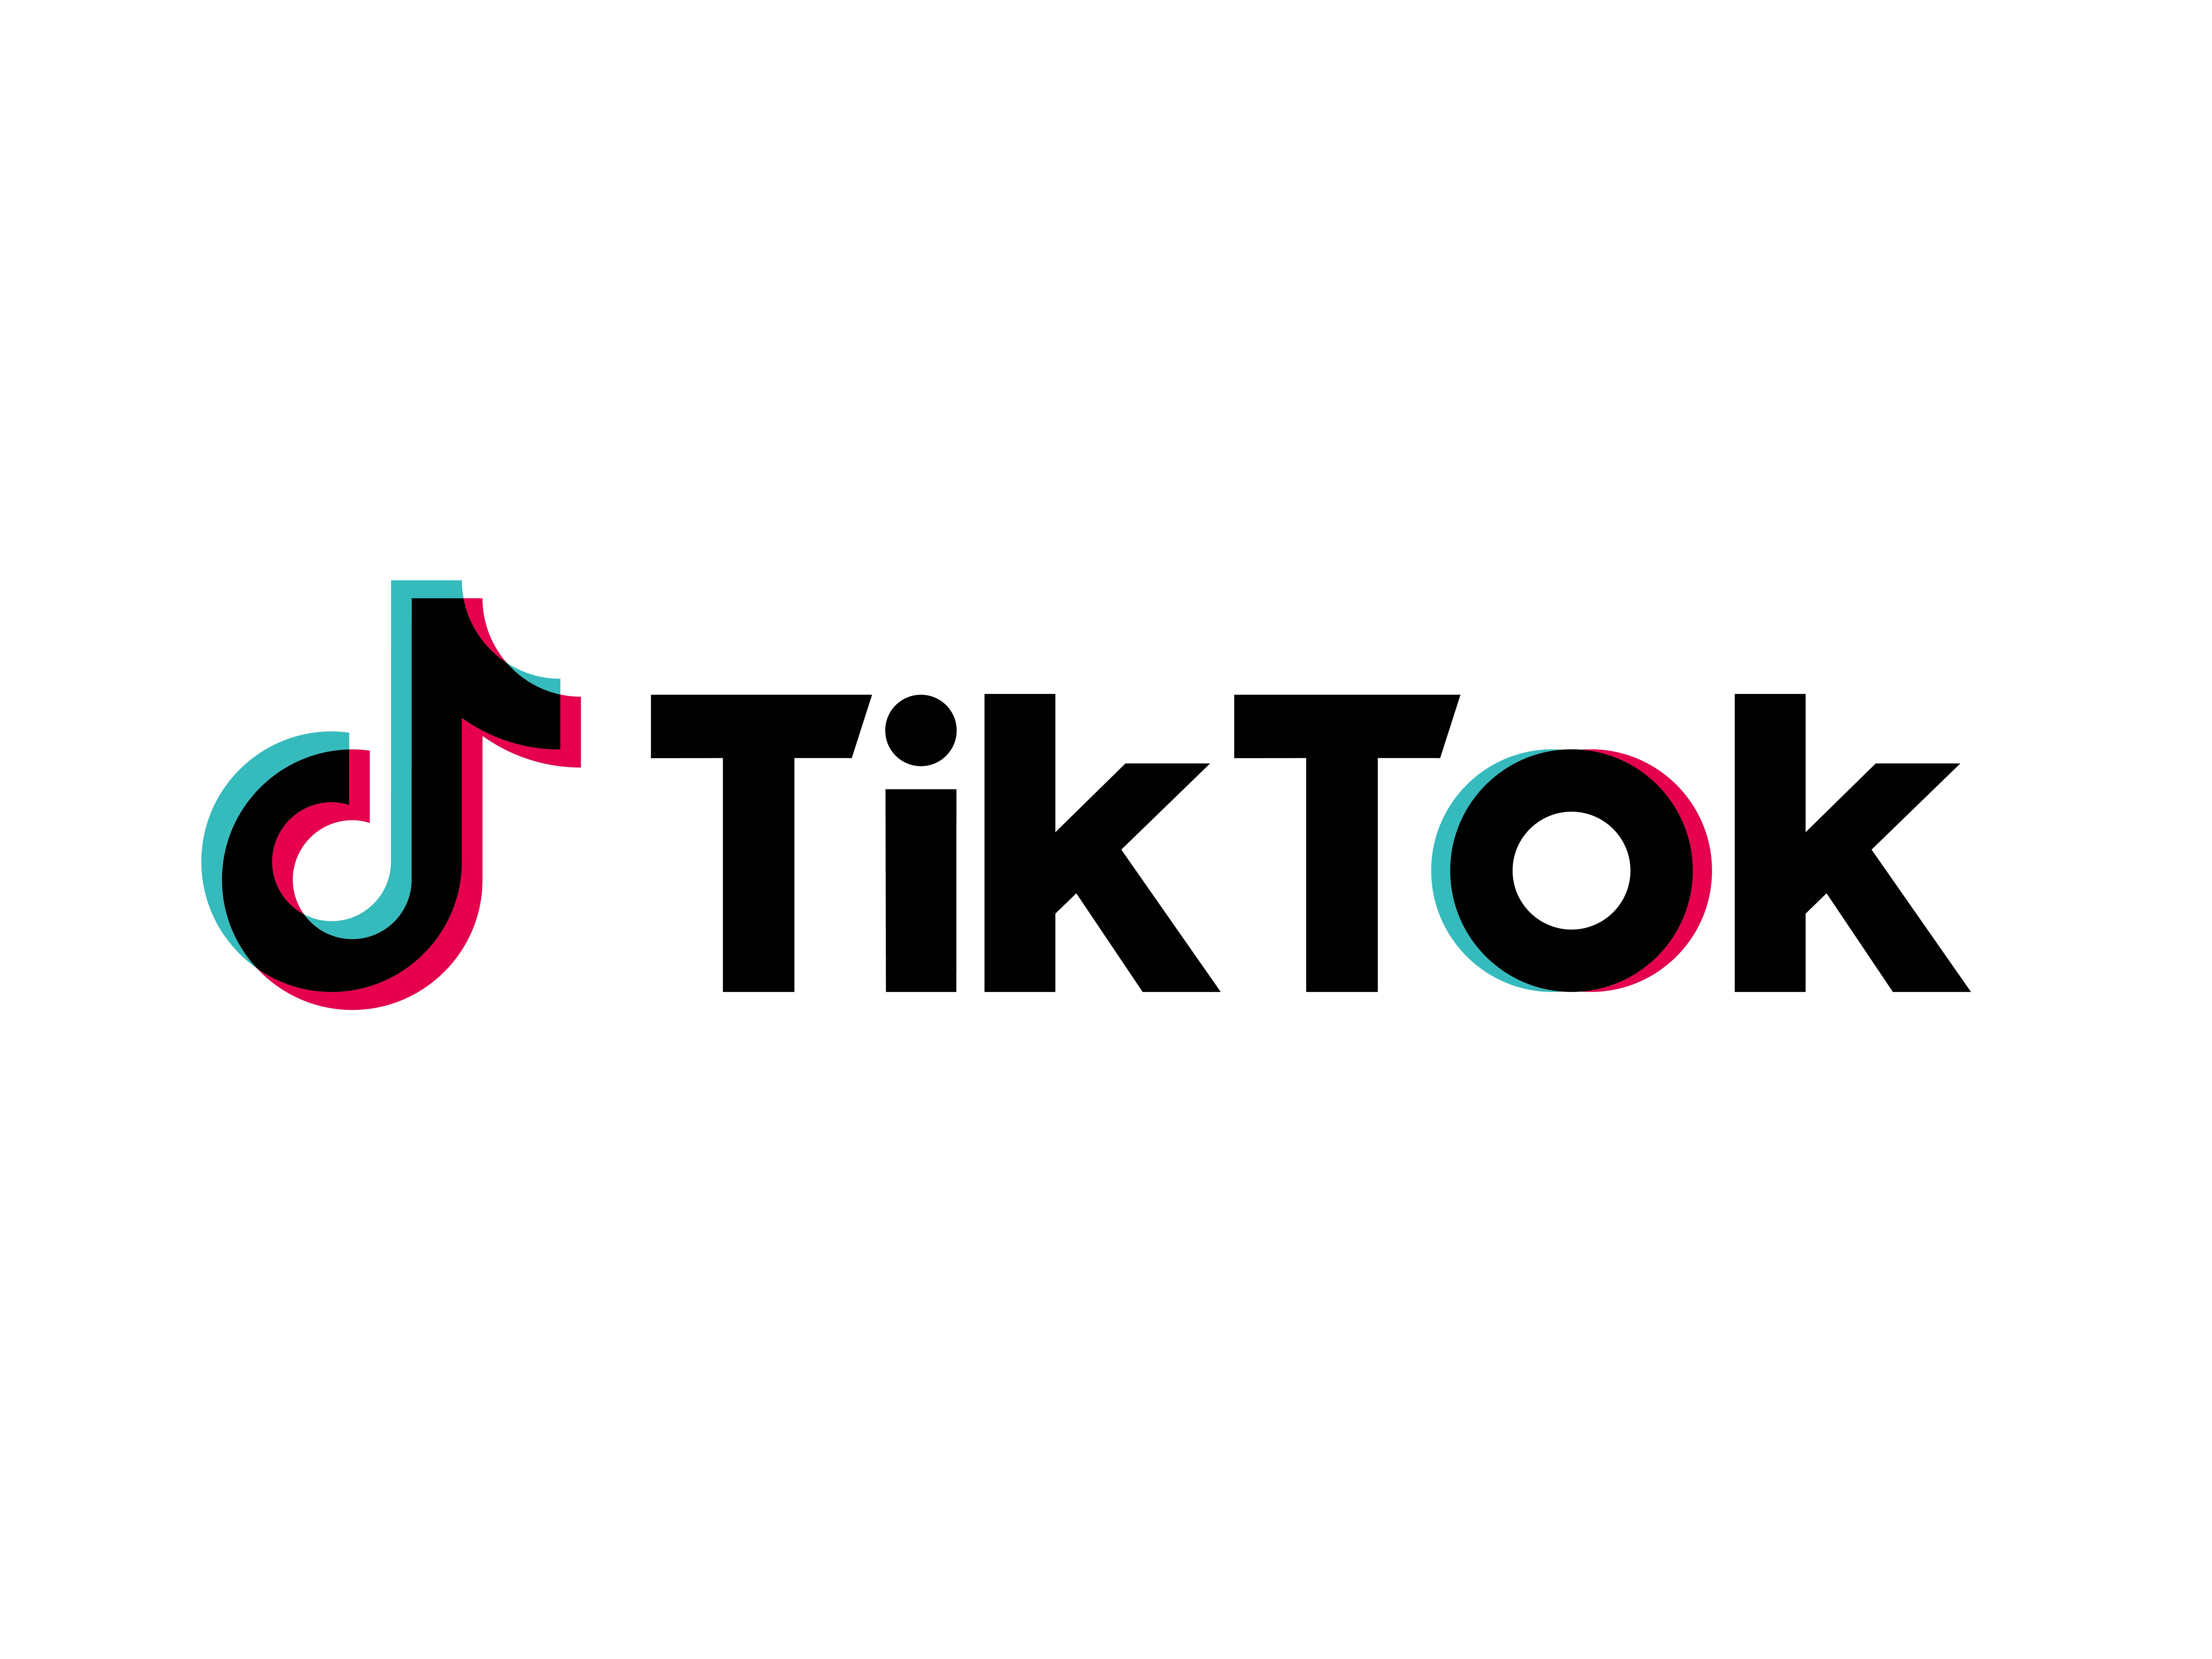 TikTok users set to hit 955 million users globally by 2025